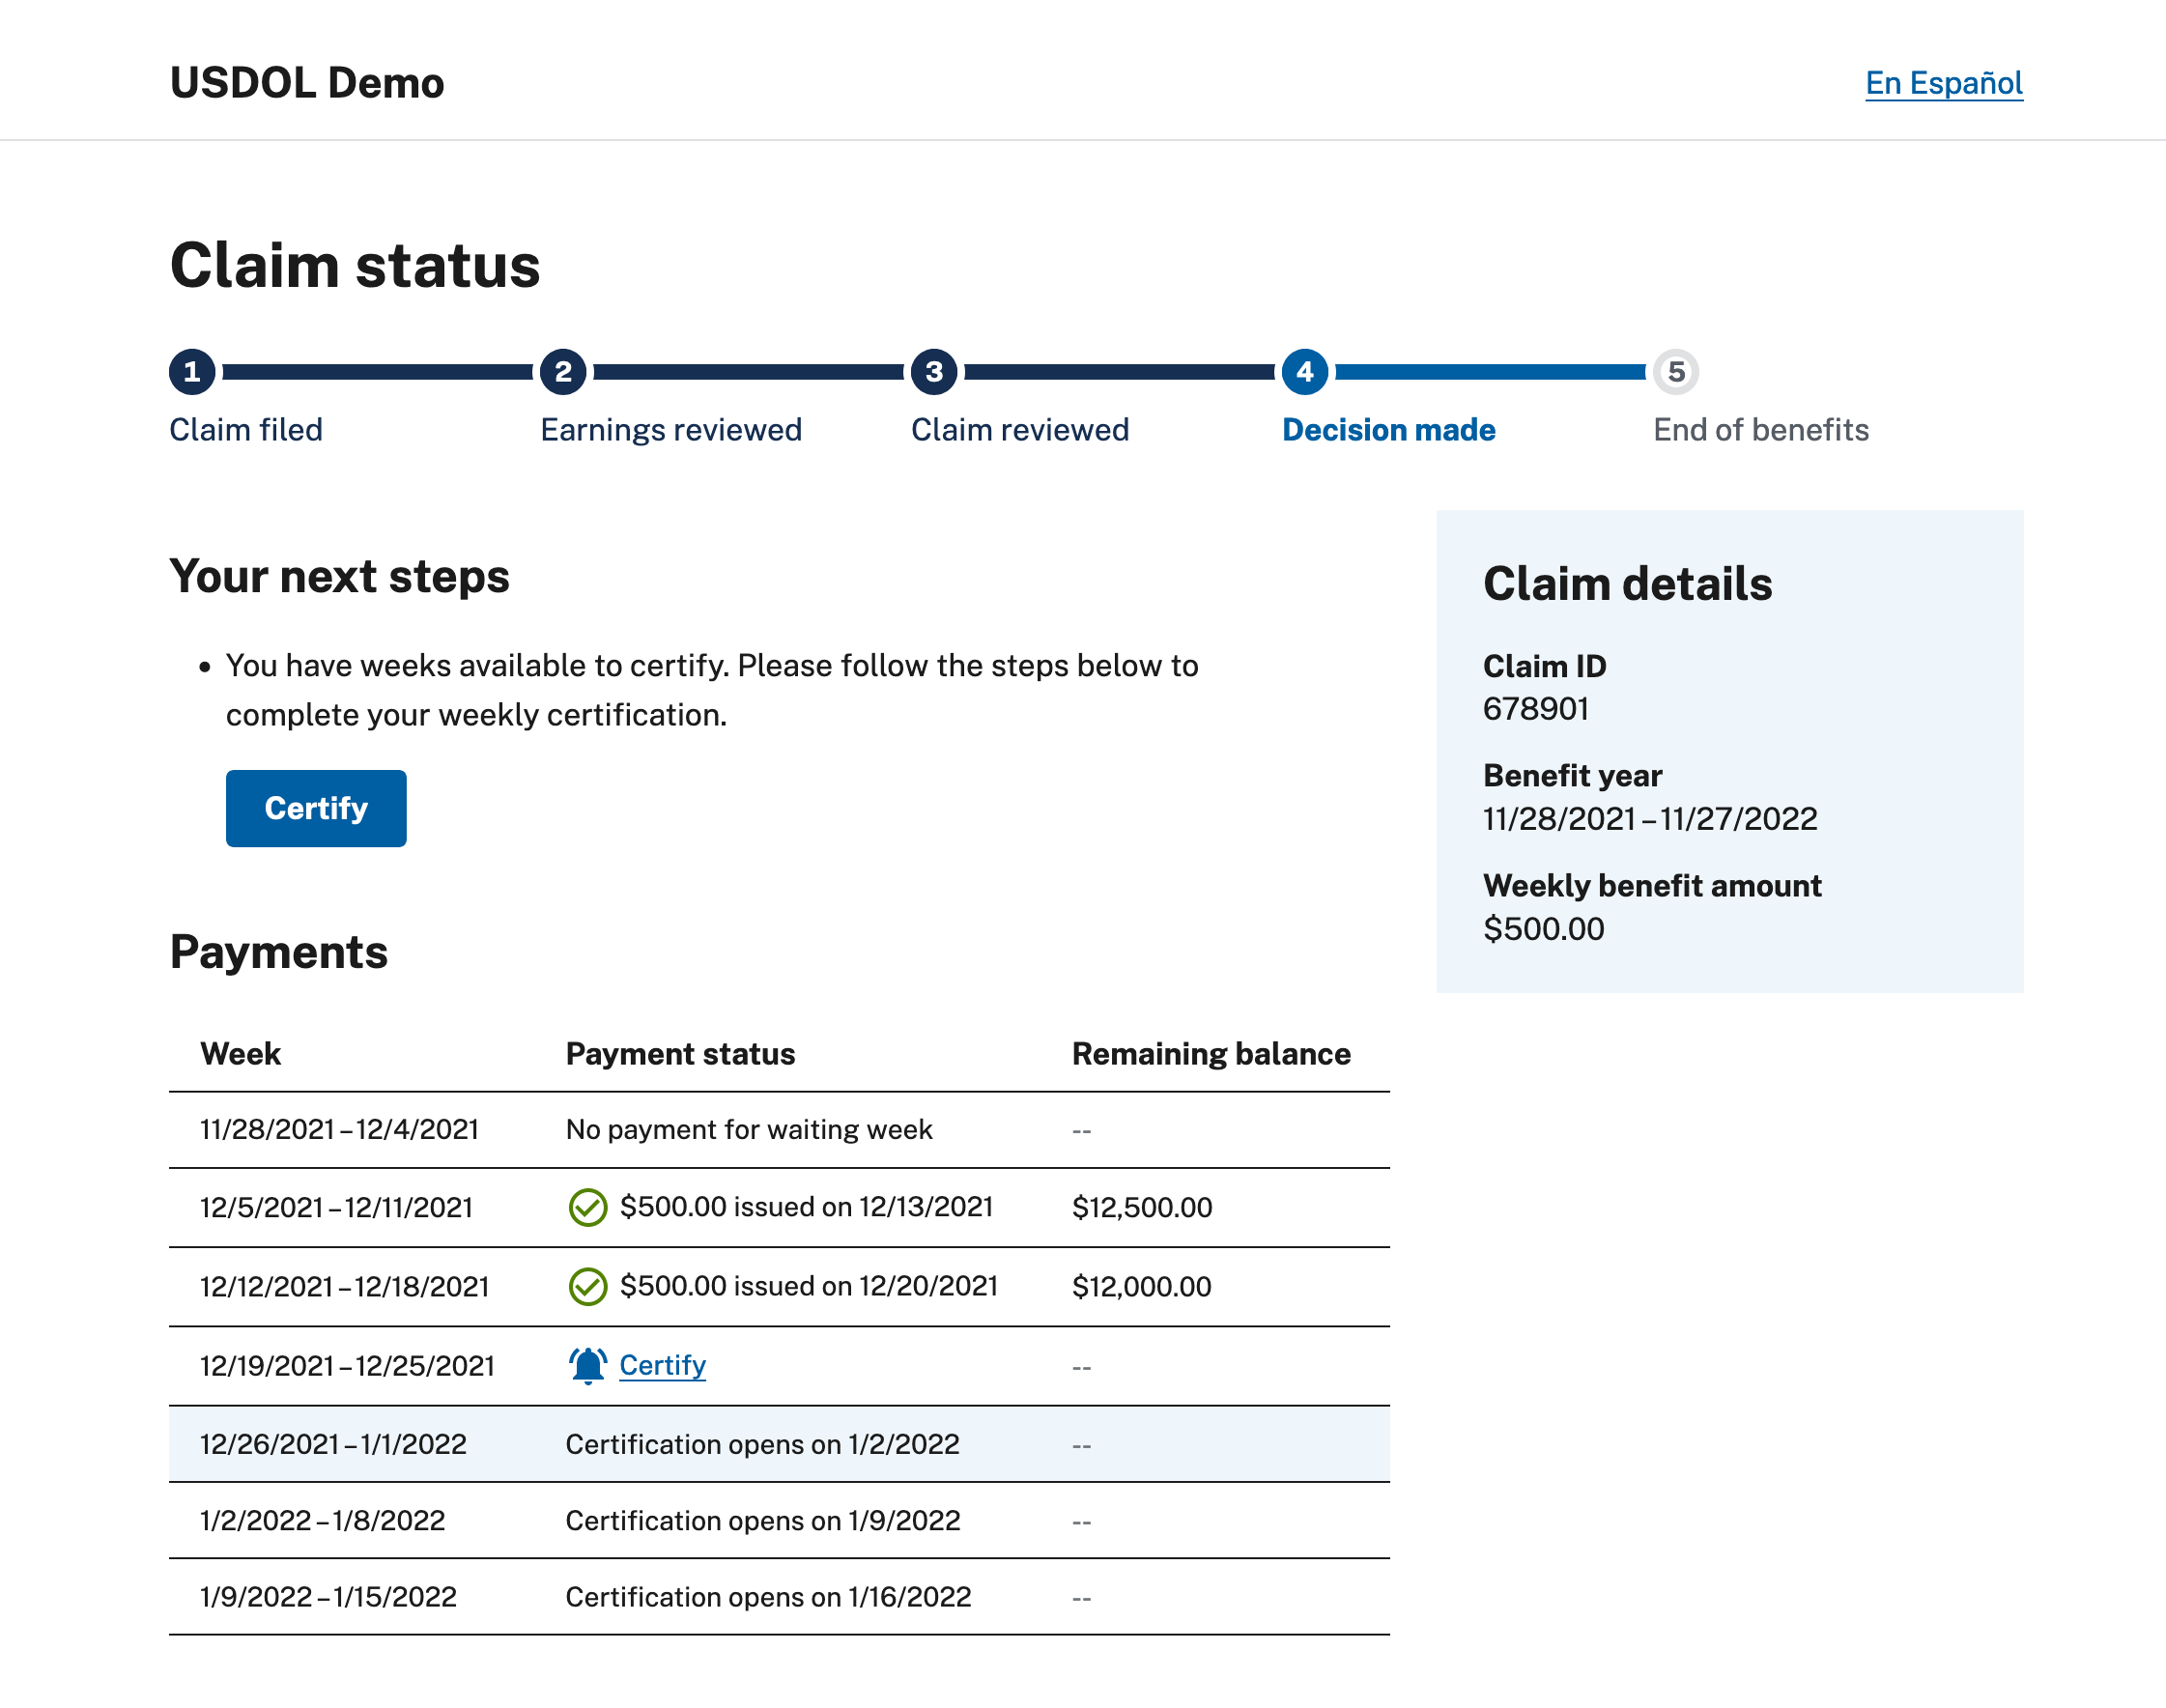 Screenshot of example claims status page in English